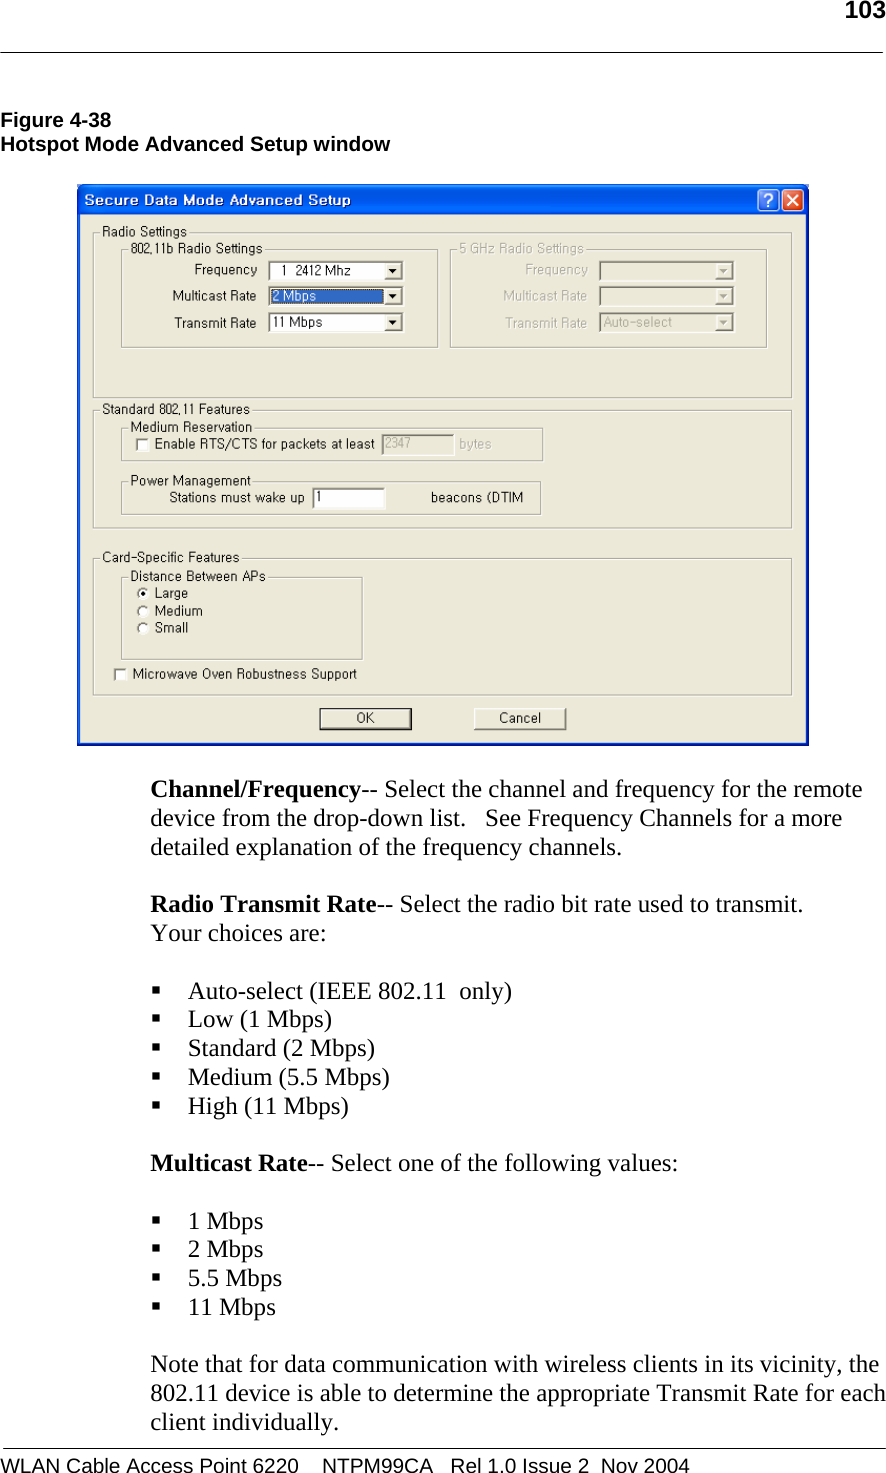   103  WLAN Cable Access Point 6220    NTPM99CA   Rel 1.0 Issue 2  Nov 2004 Figure 4-38 Hotspot Mode Advanced Setup window     Channel/Frequency-- Select the channel and frequency for the remote device from the drop-down list.   See Frequency Channels for a more detailed explanation of the frequency channels.  Radio Transmit Rate-- Select the radio bit rate used to transmit.  Your choices are:   Auto-select (IEEE 802.11  only)  Low (1 Mbps)  Standard (2 Mbps)  Medium (5.5 Mbps)  High (11 Mbps)  Multicast Rate-- Select one of the following values:   1 Mbps  2 Mbps  5.5 Mbps  11 Mbps  Note that for data communication with wireless clients in its vicinity, the 802.11 device is able to determine the appropriate Transmit Rate for each client individually.  